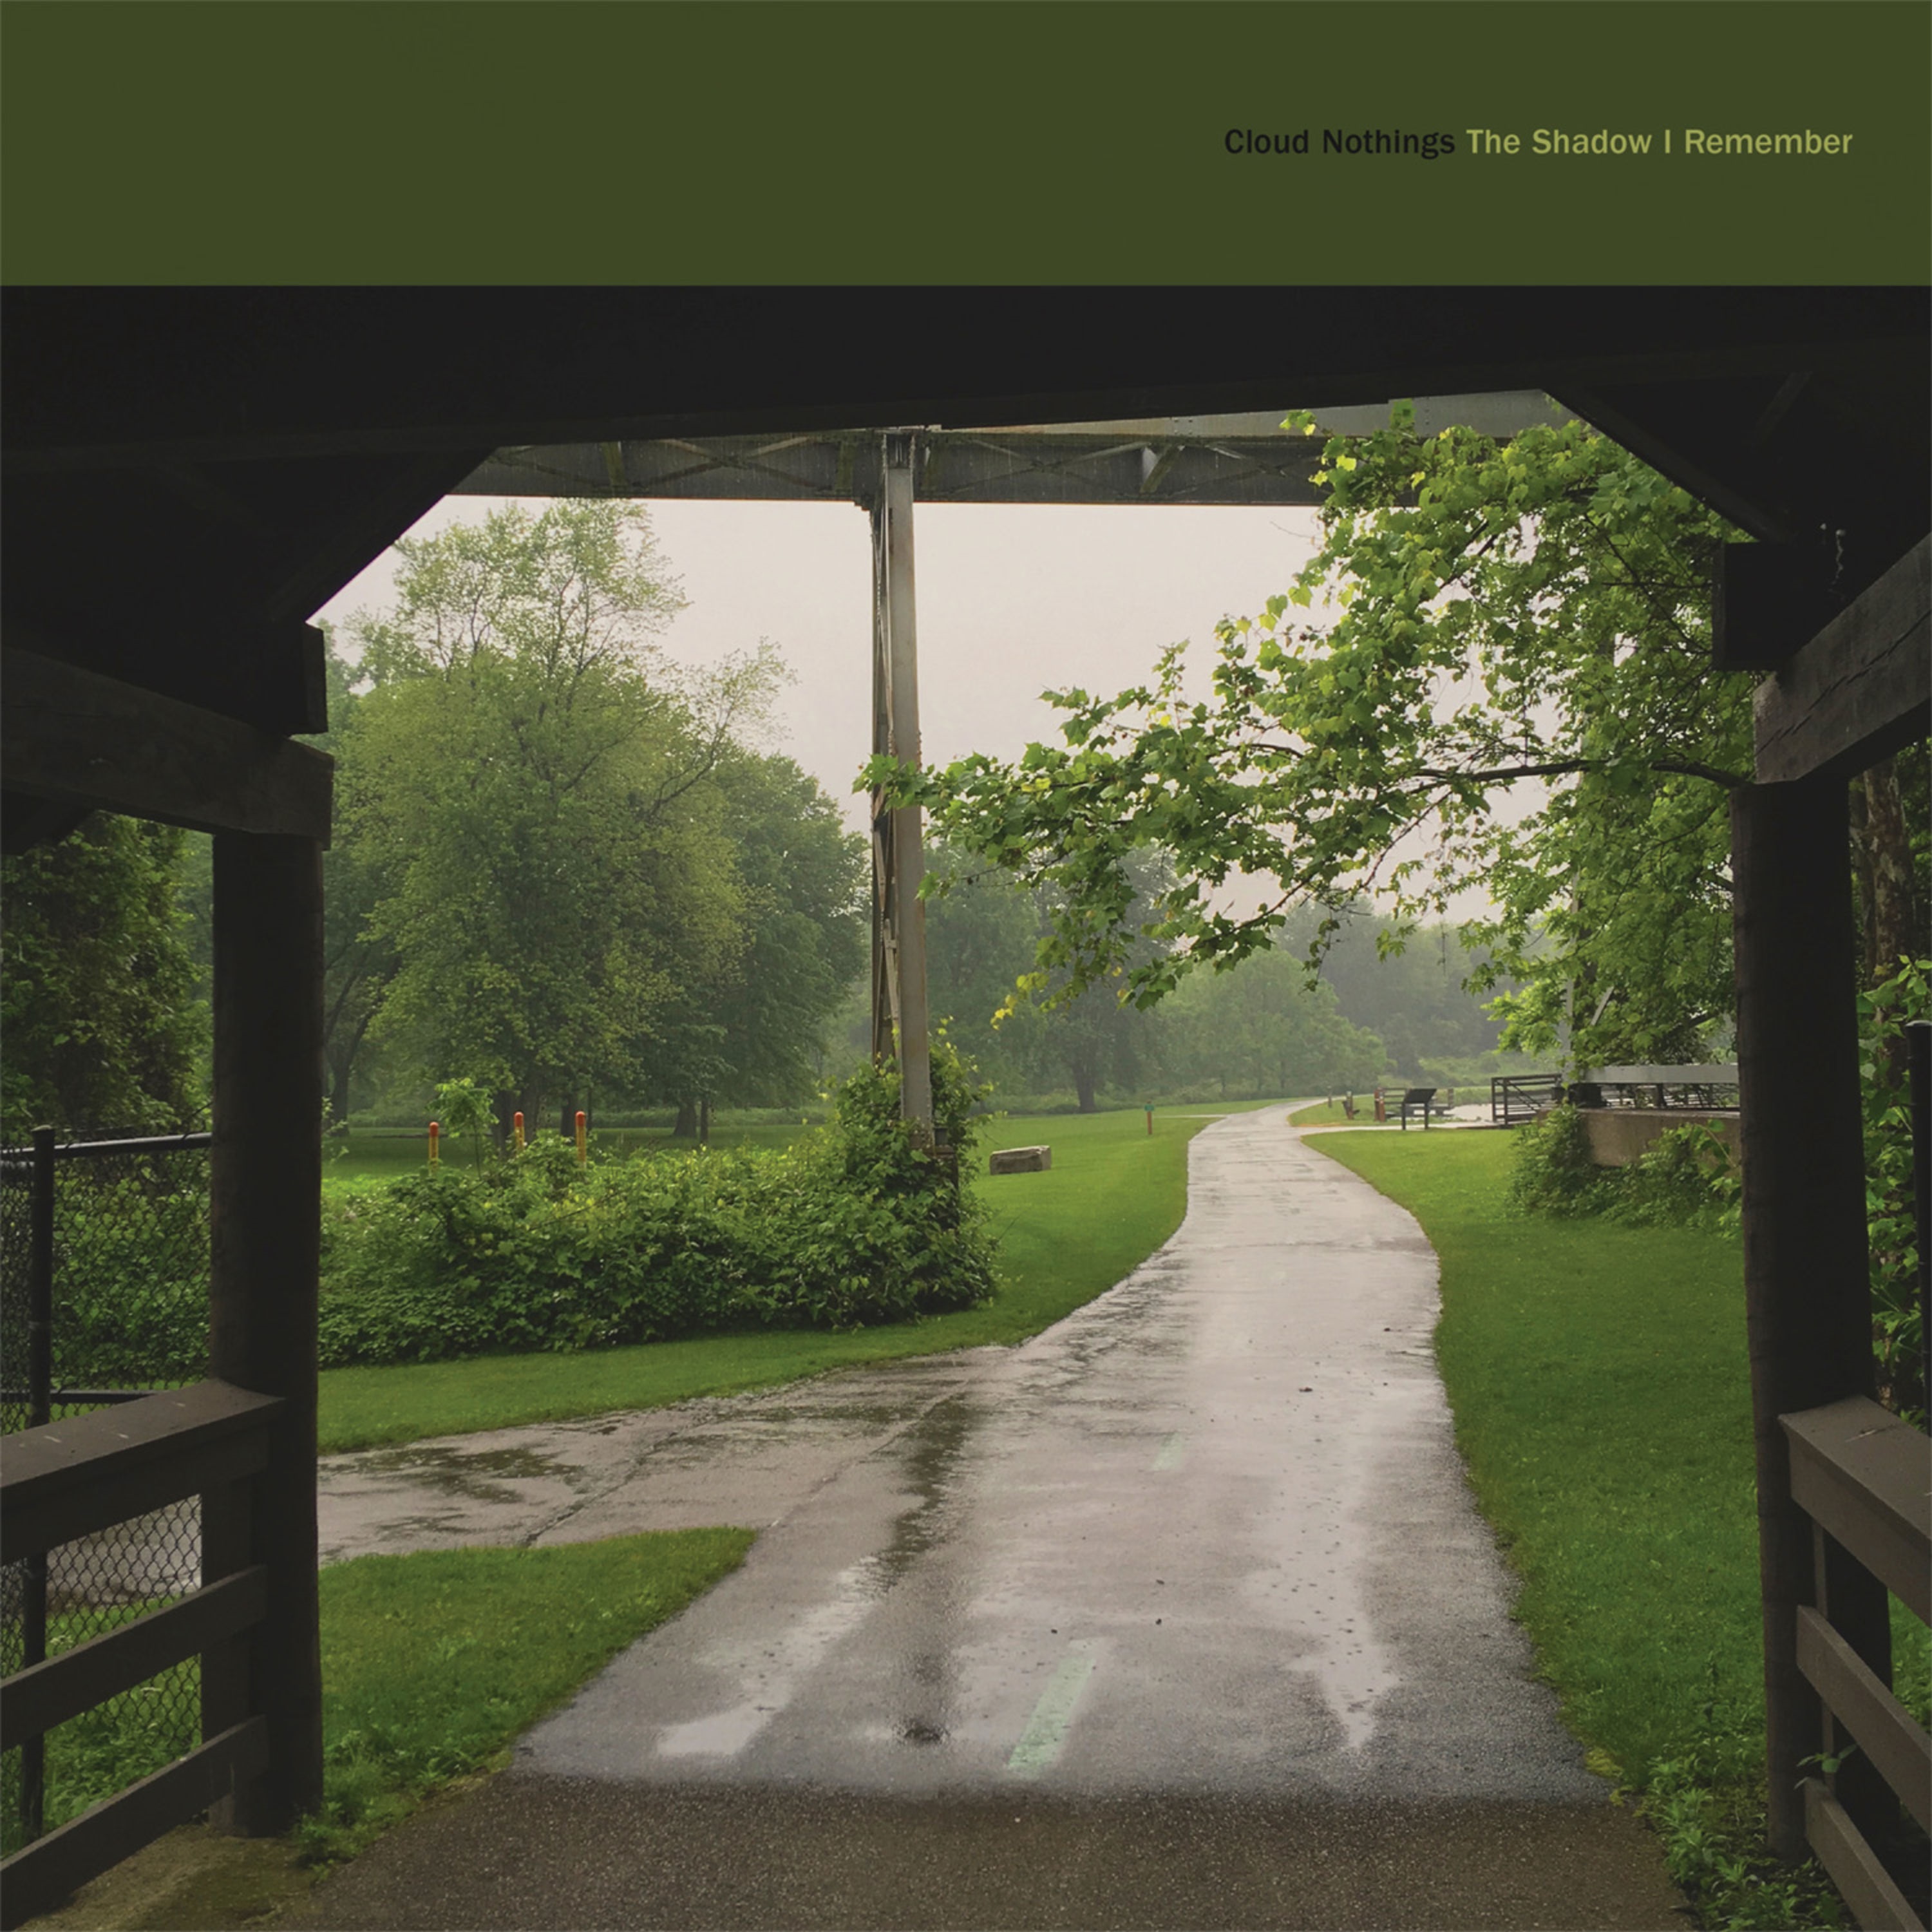 Cloud Nothings - The Shadow I Remember (2021) [FLAC 24bit/96kHz]